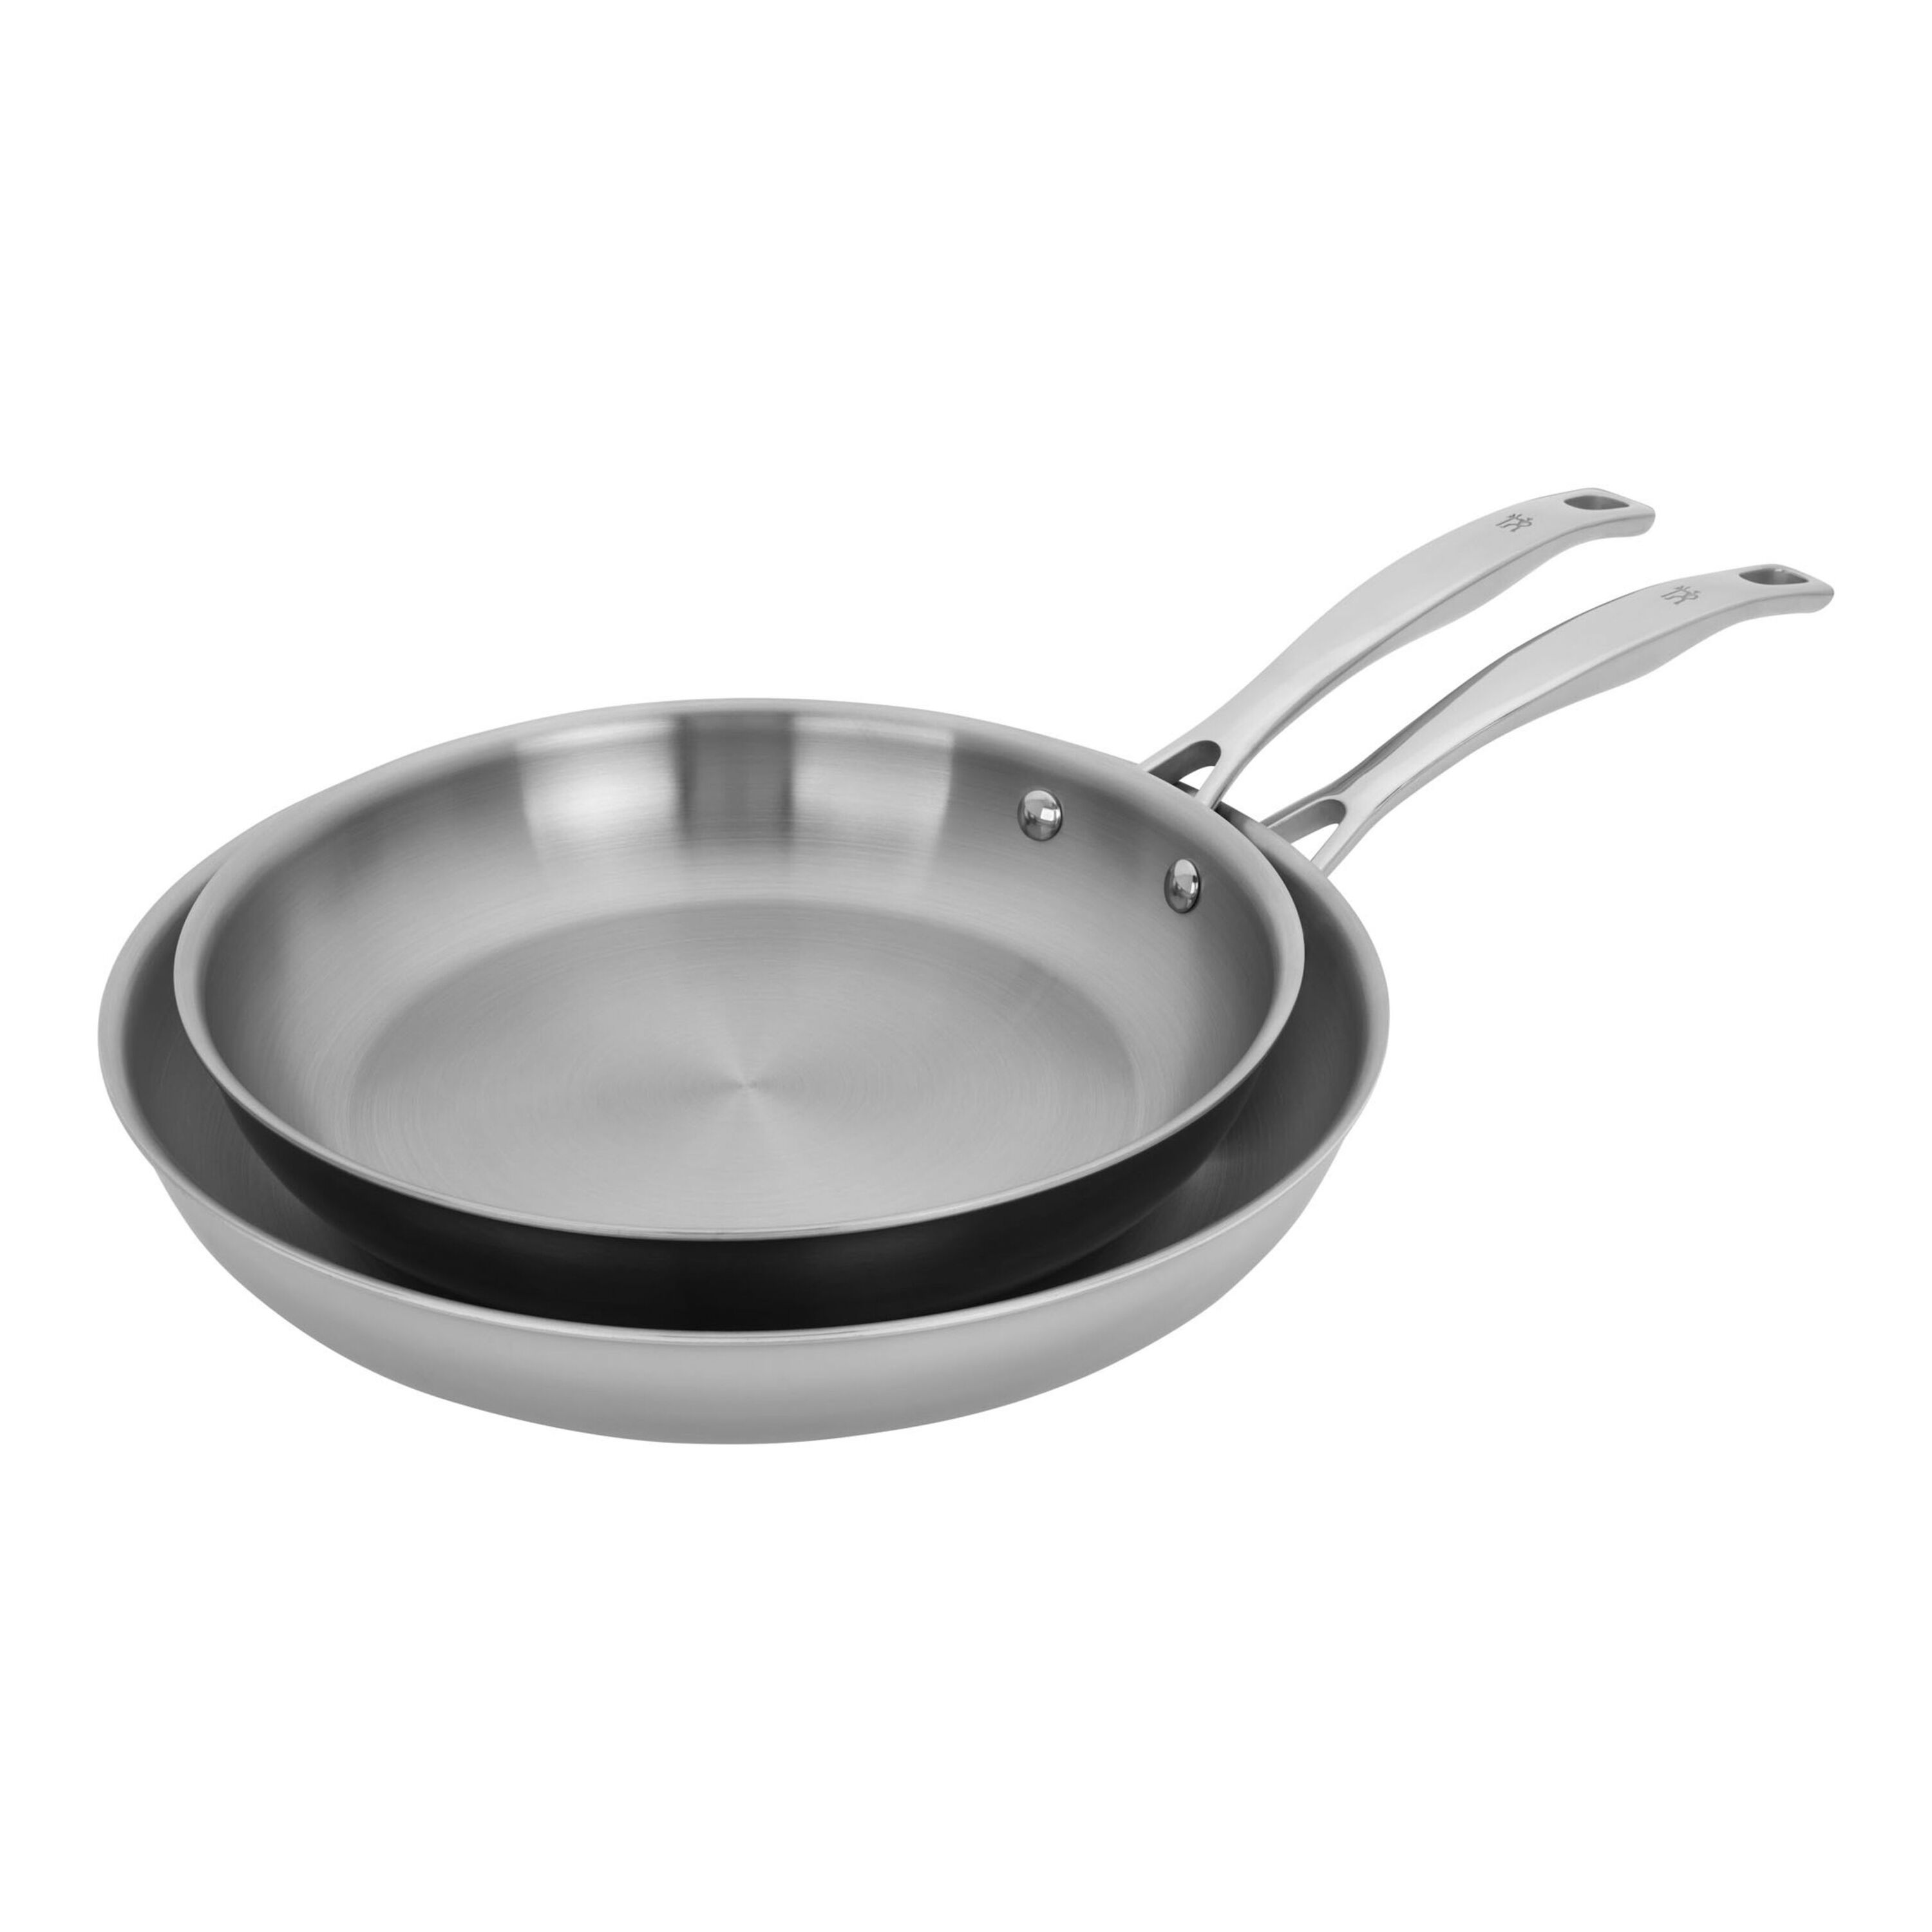 Henckels Clad H3 2-Pc Stainless Steel Ceramic Nonstick 8-in & 10-in Fry Pan  Set - Stainless Steel - 86 requests